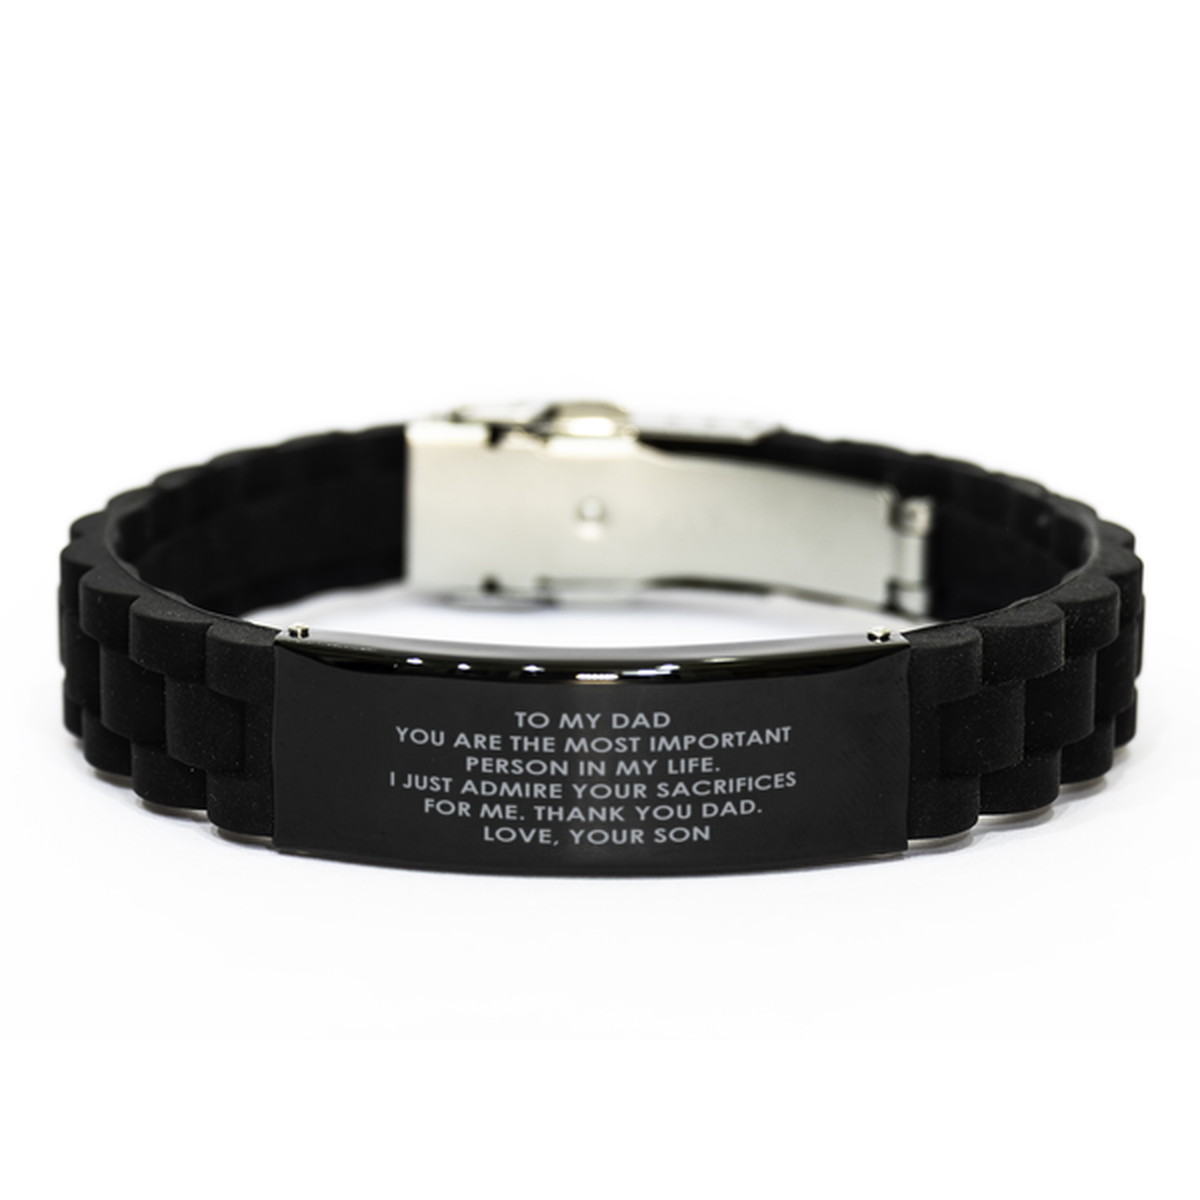 To My Dad Black Bracelet, You Are The Most Important Person, Fathers Day Gifts For Dad From Son, Birthday Gifts For Men